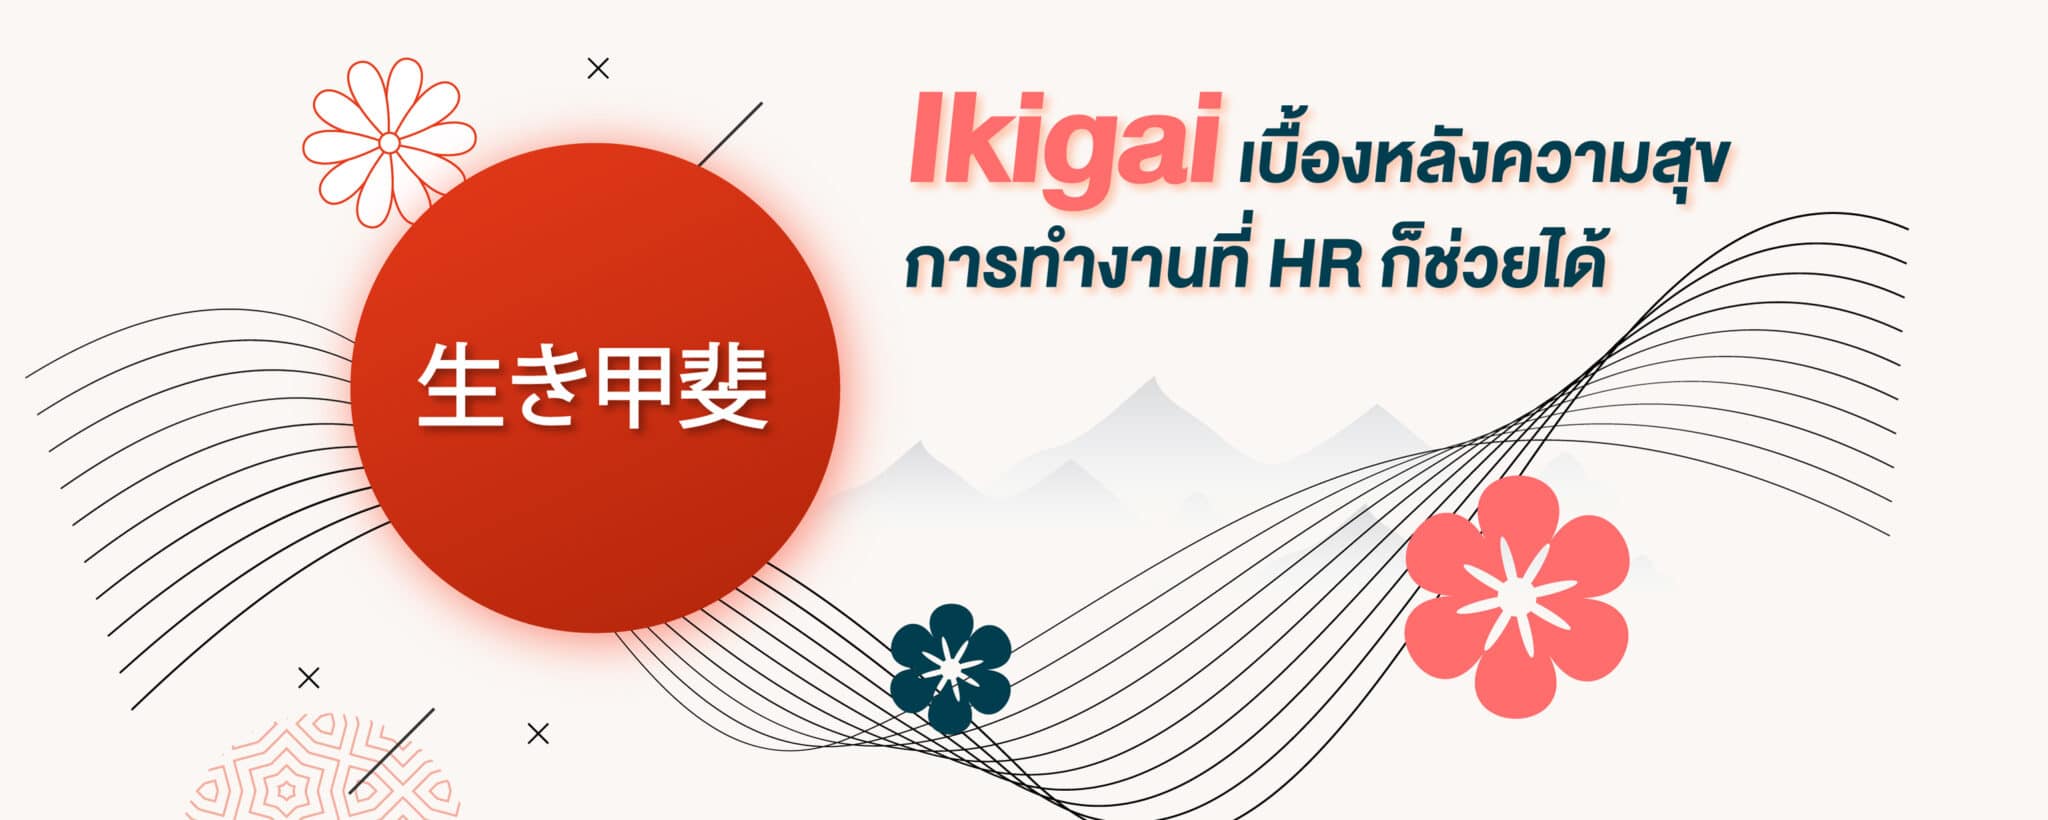 ikigai and hr for happy workplace